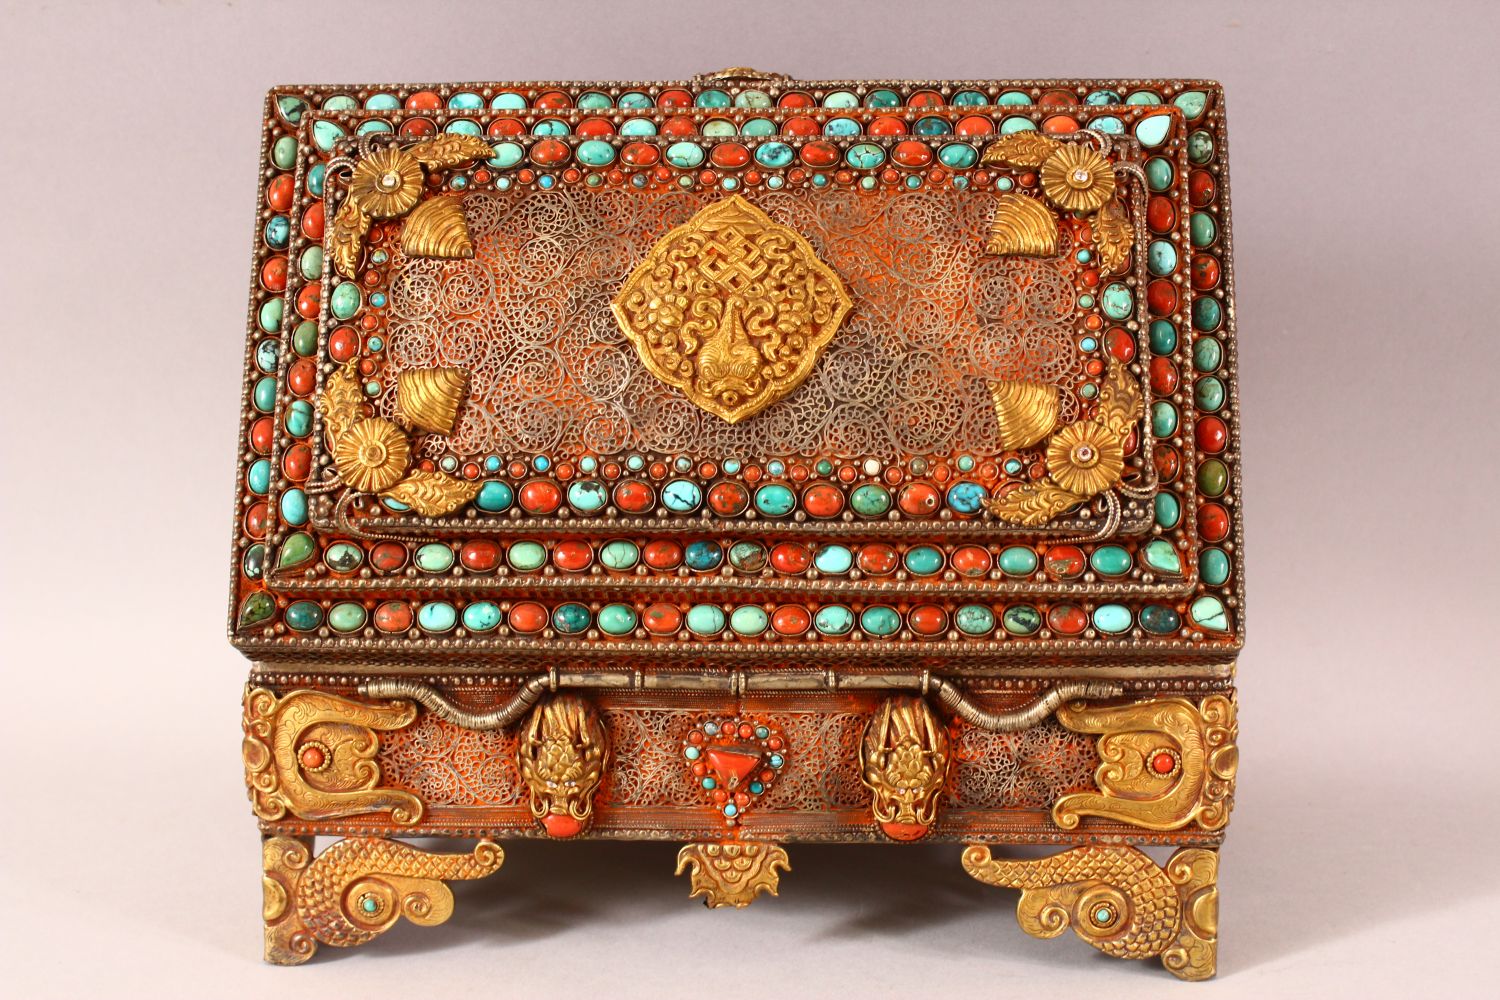 A TIBETAN MOUNTED AND INLAID METAL CASKET, the body with openwork style inlay, with gilt raised - Image 5 of 7